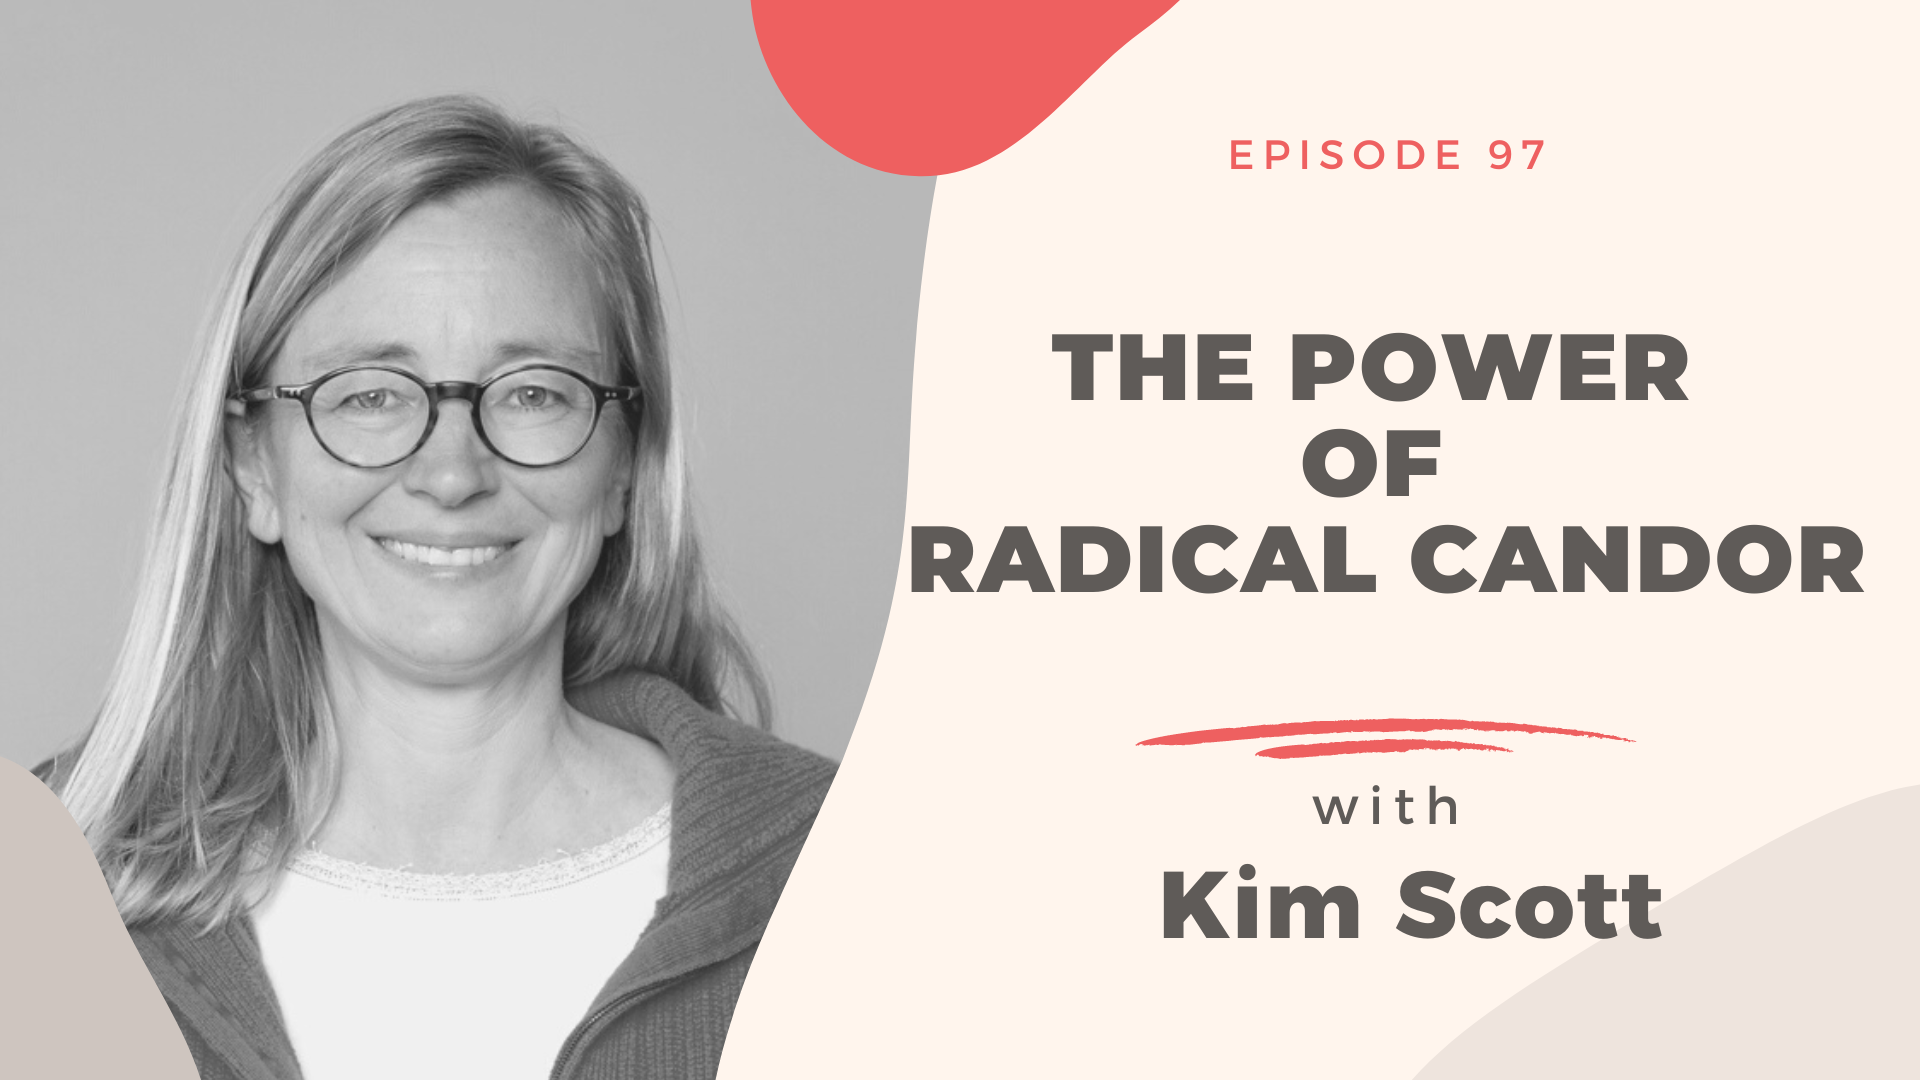 The Power of Radical Candor with Kim Scott